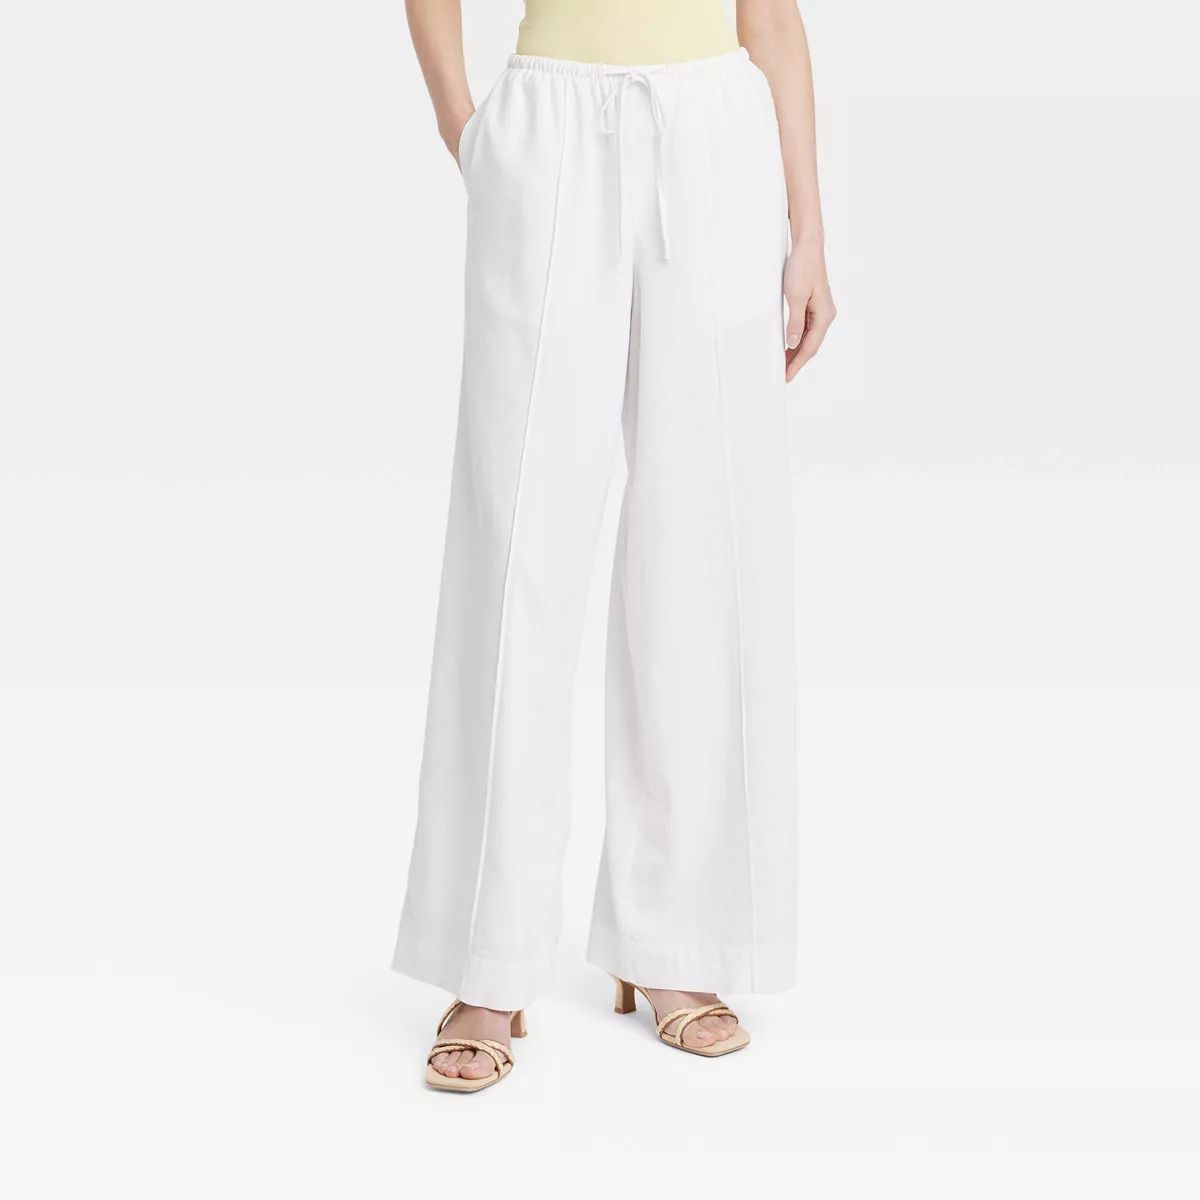 Women's High-Rise Wide Leg Linen Pull-On Pants - A New Day™ White M | Target